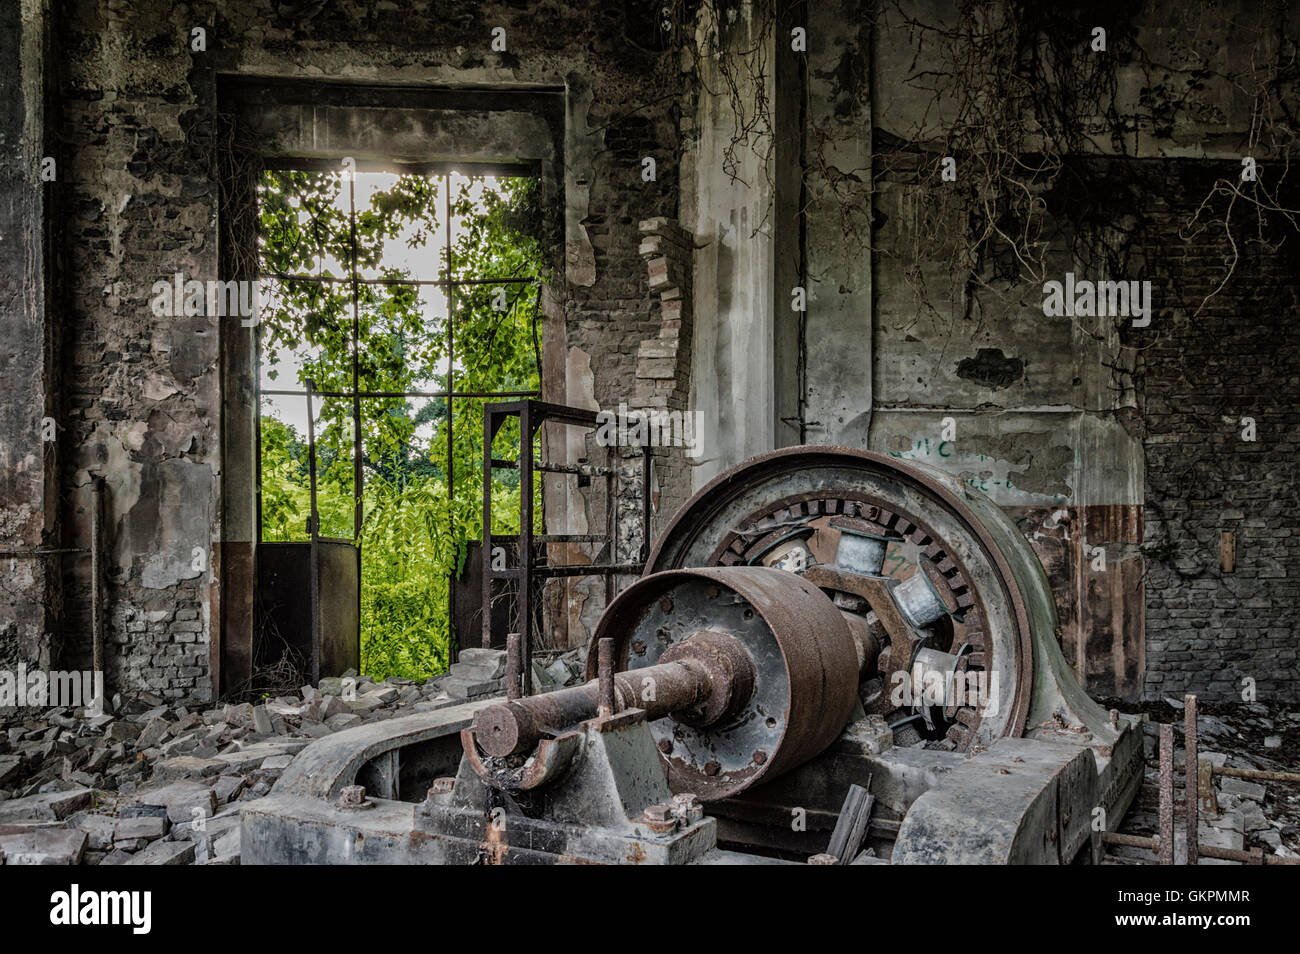 Dusty Machinery in abandoned factory ready for demolition Stock Photo